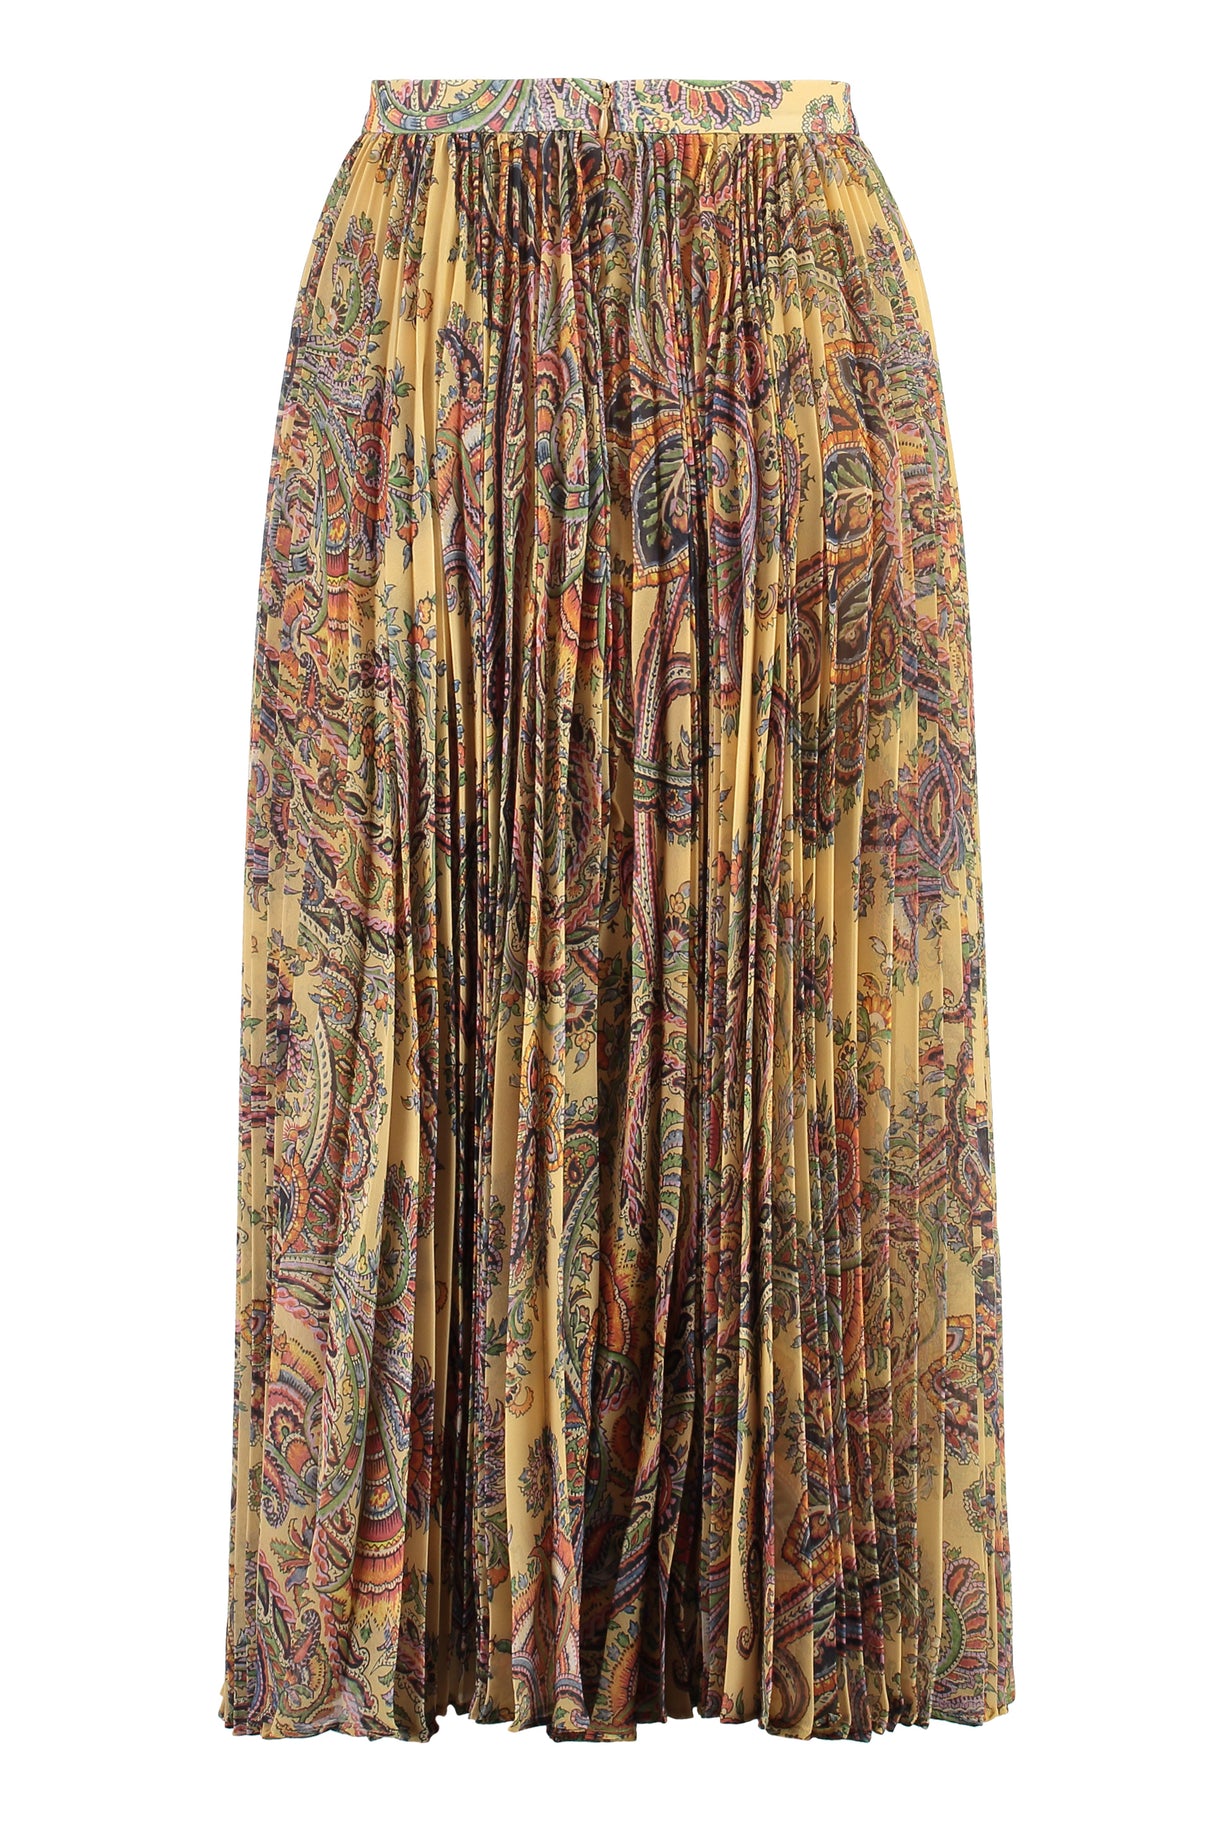 ETRO Stylish Pleated Long Skirt for the Modern Woman